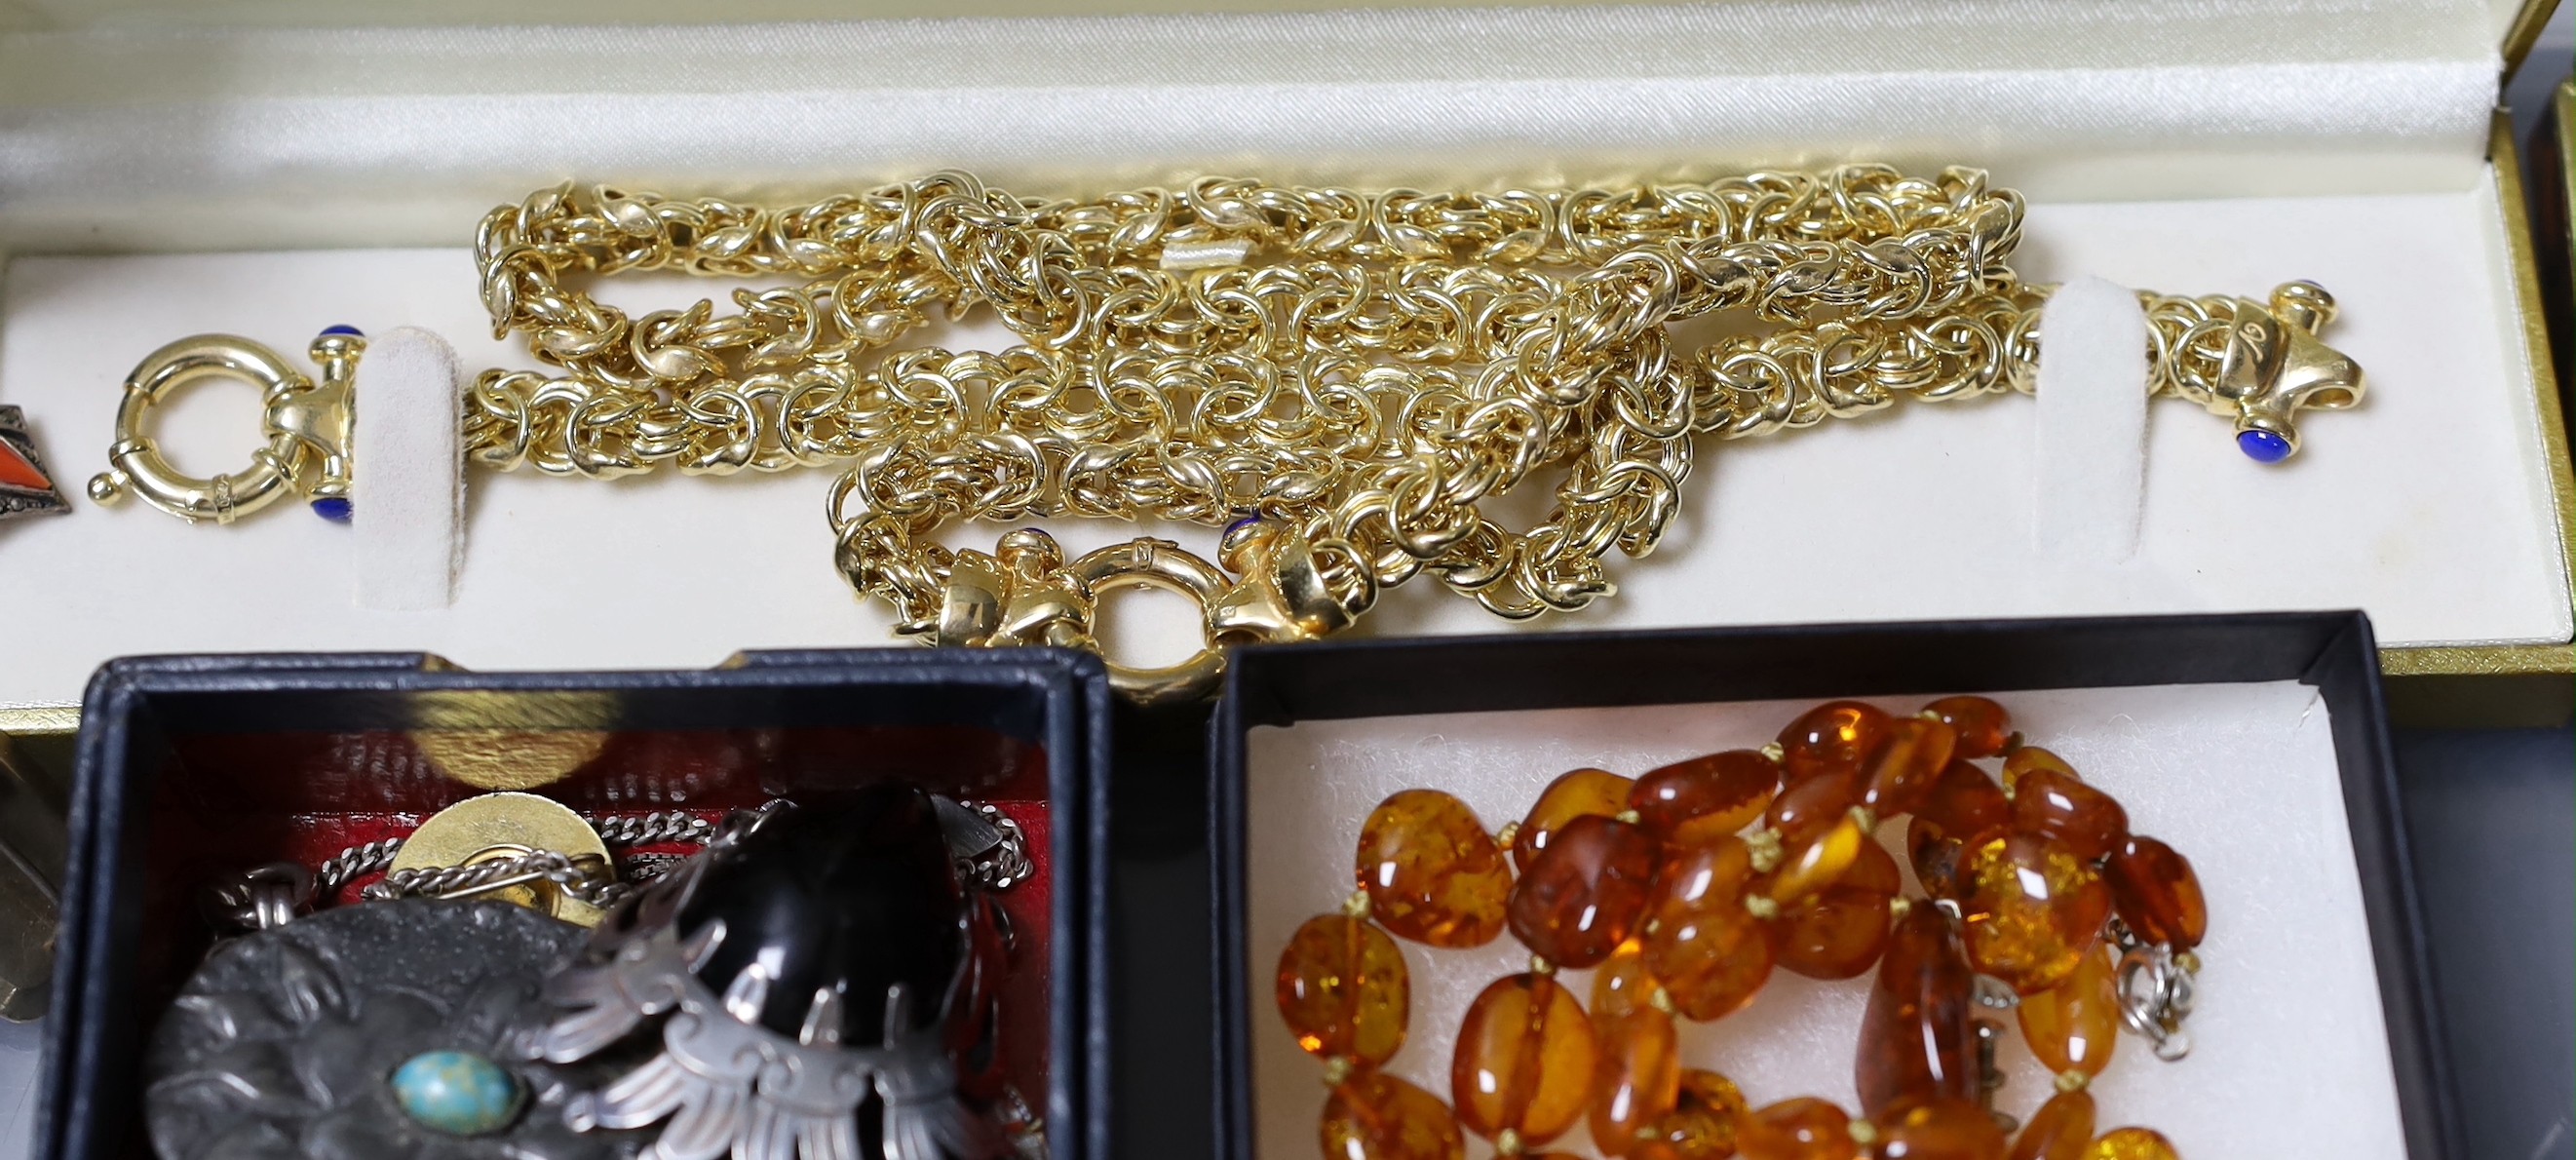 Mixed jewellery including amber necklace, dress stud set, marcasite earrings etc.